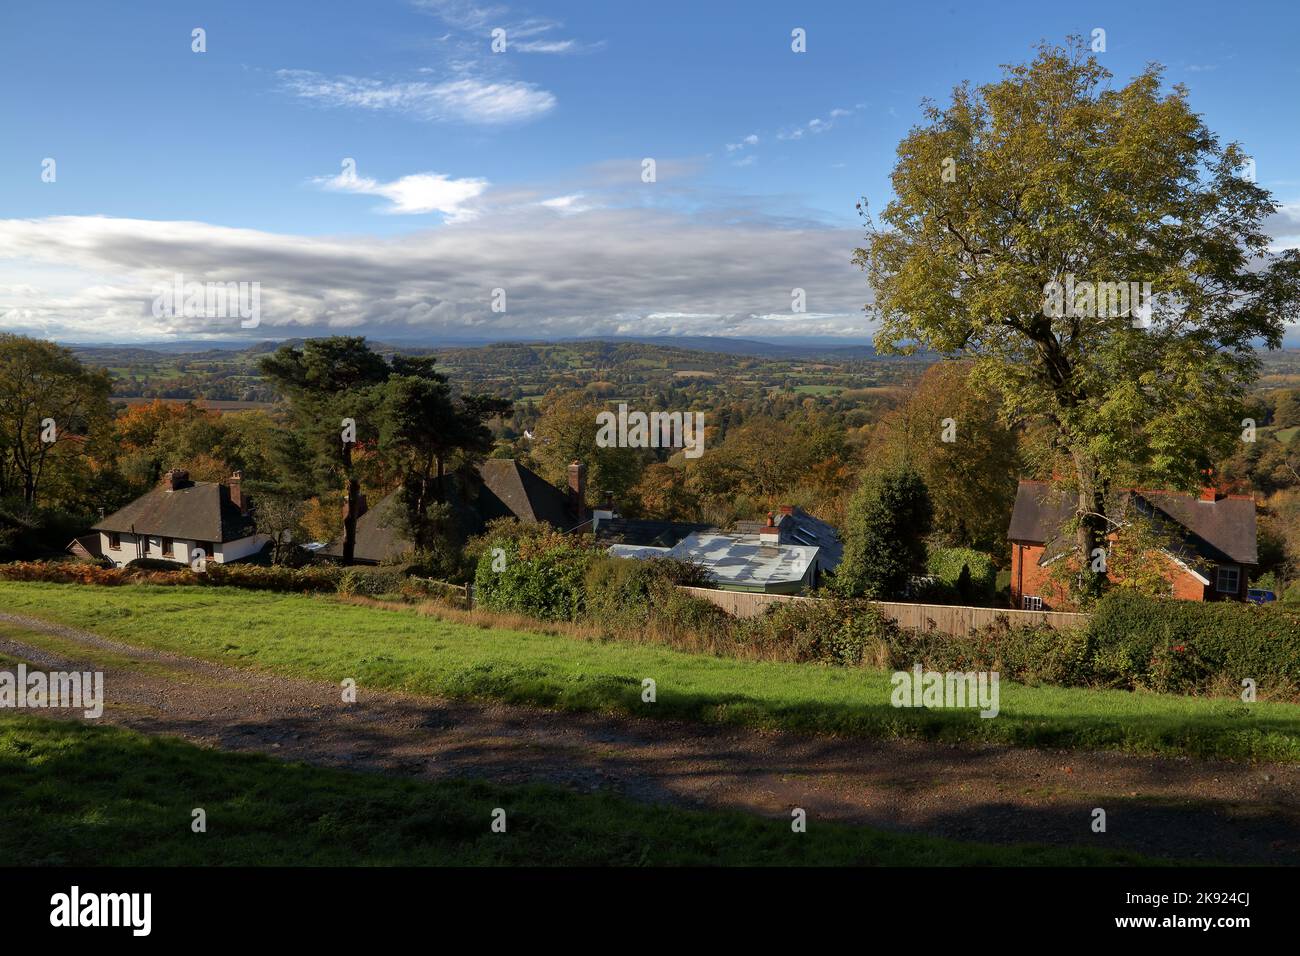 Looking out across the landscape from halfway up a Malvern hill showing a few houses and woods along with fields as far as the eye can see. Stock Photo